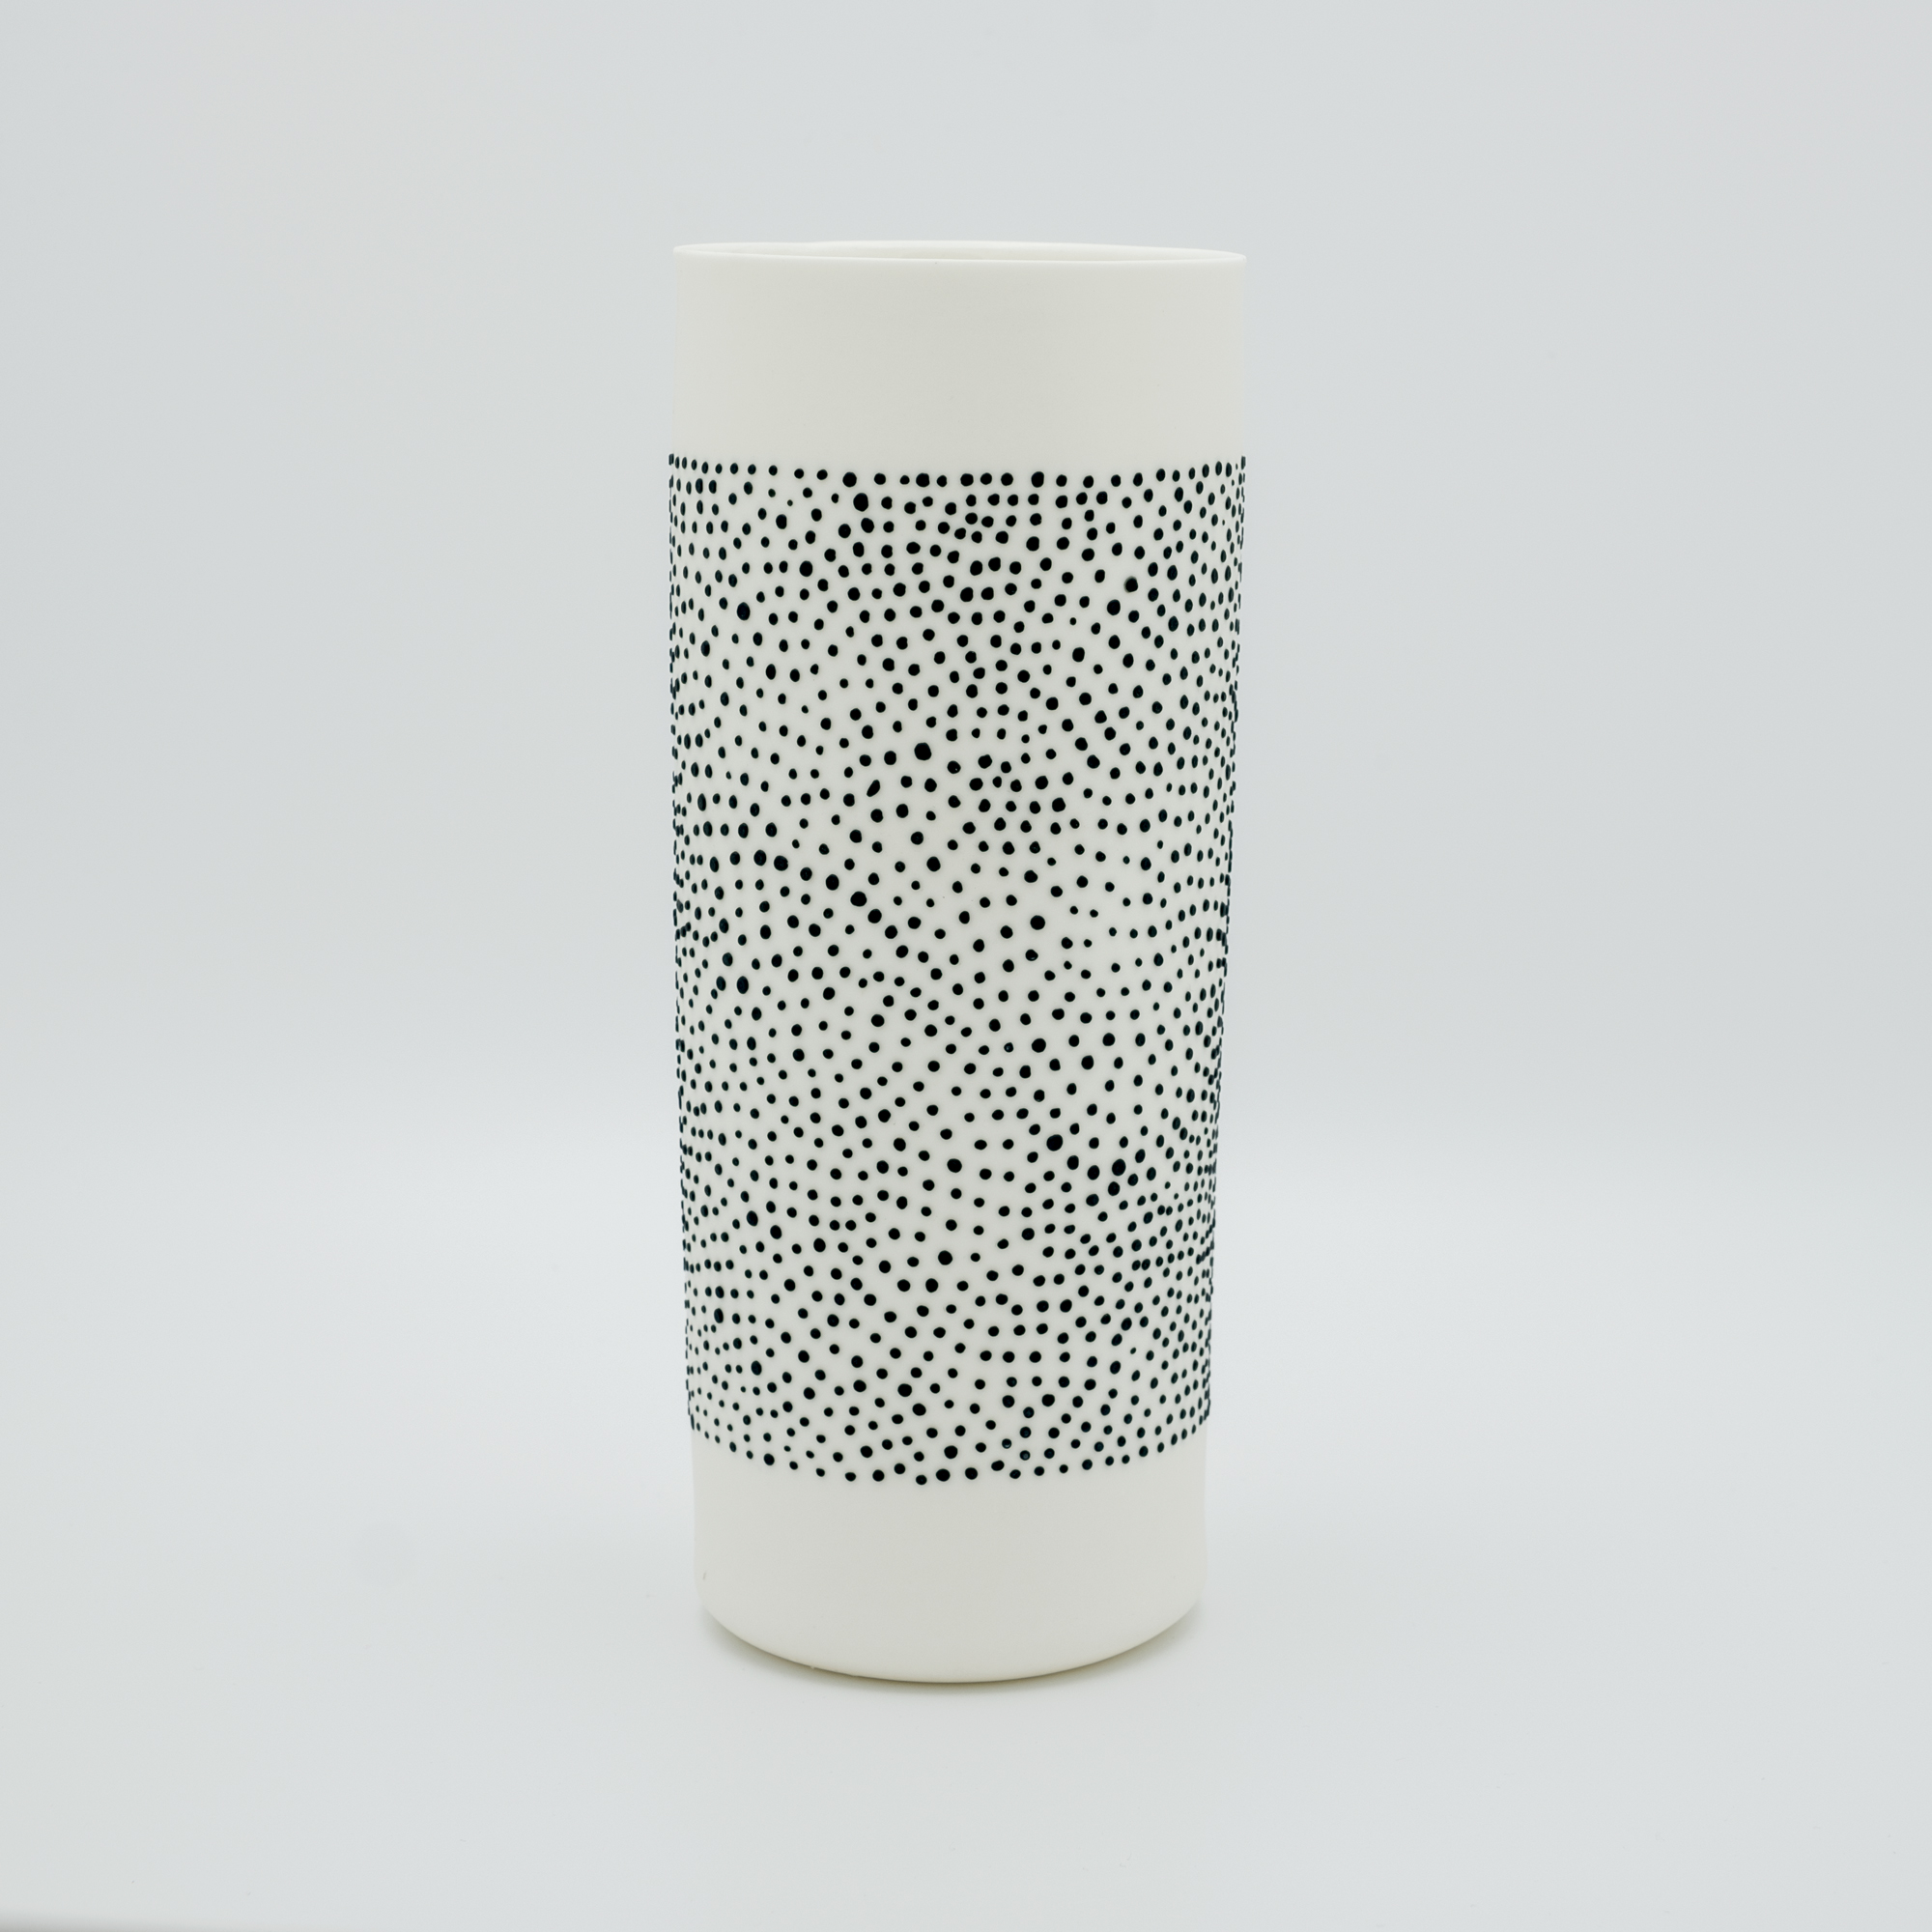 Handmade porcelain vase ‘long neck” from our ‘DOTS’ collection in black